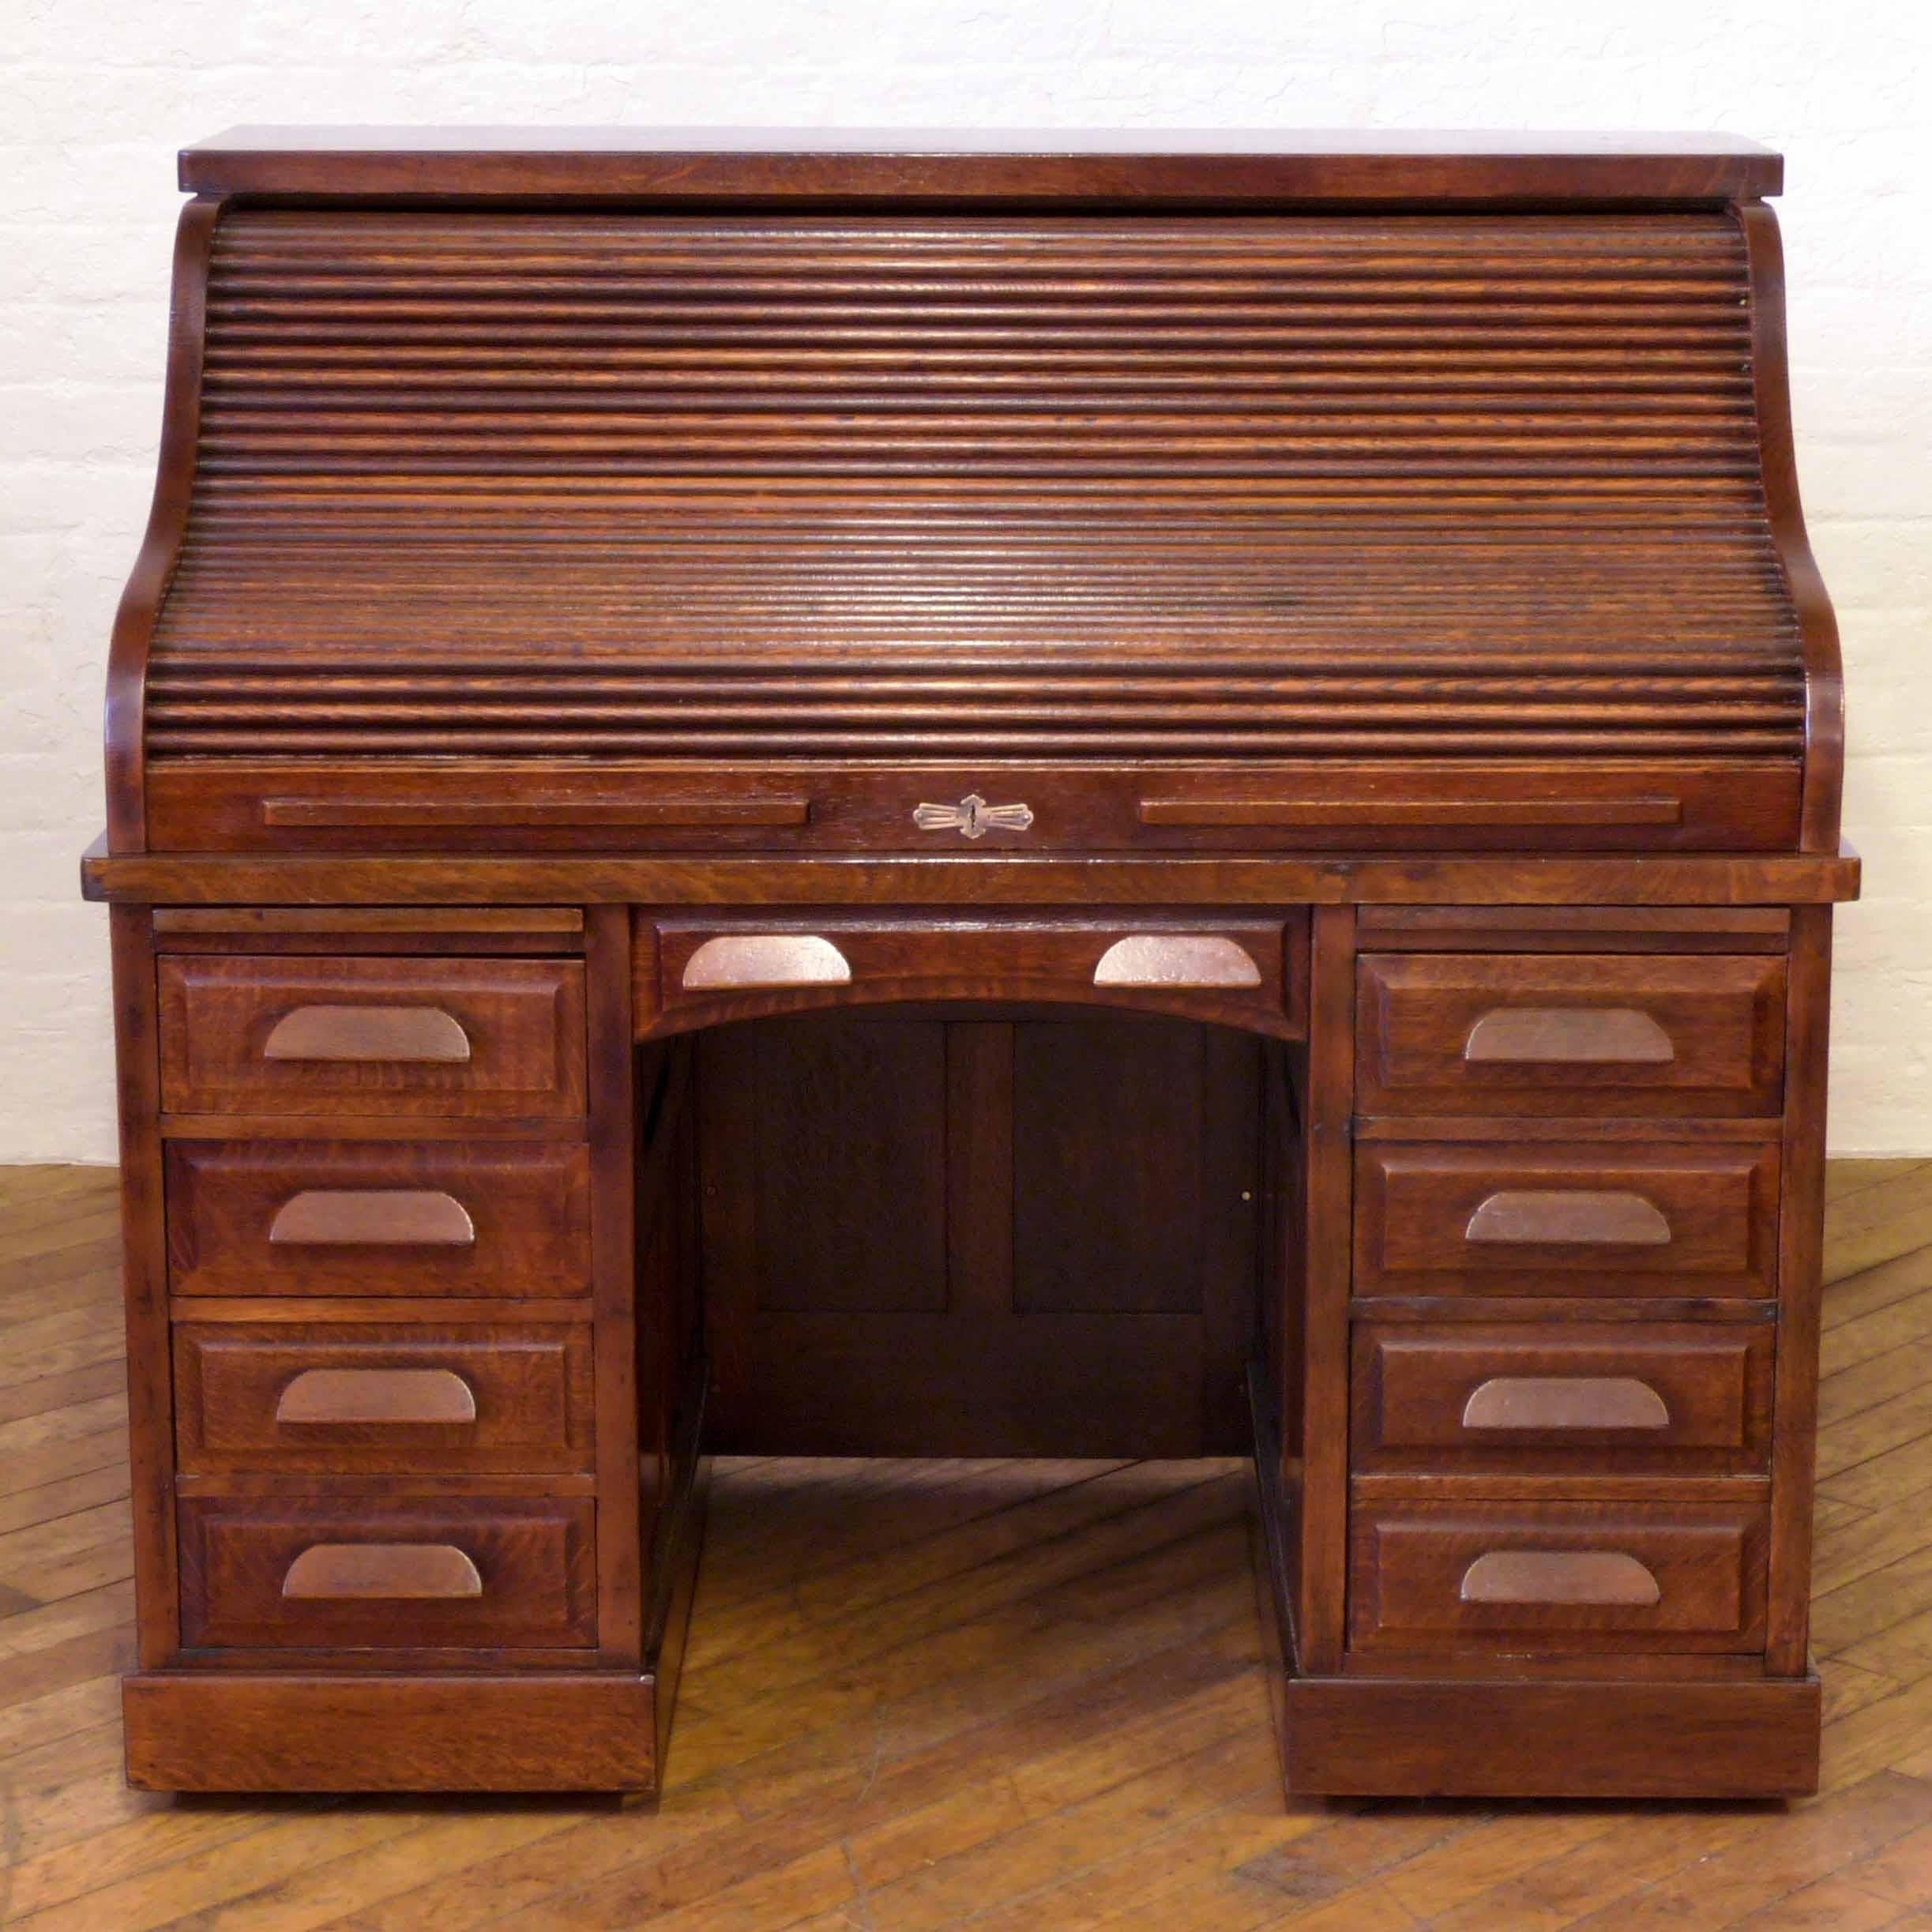 A superb large roll top desk with spectacular interior recently repolished to its original dark oak finish. With deep fielded (bevel edged) panels to the rear and sides. This desk looks fantastic to all sides. When closed, the roller shutter locks